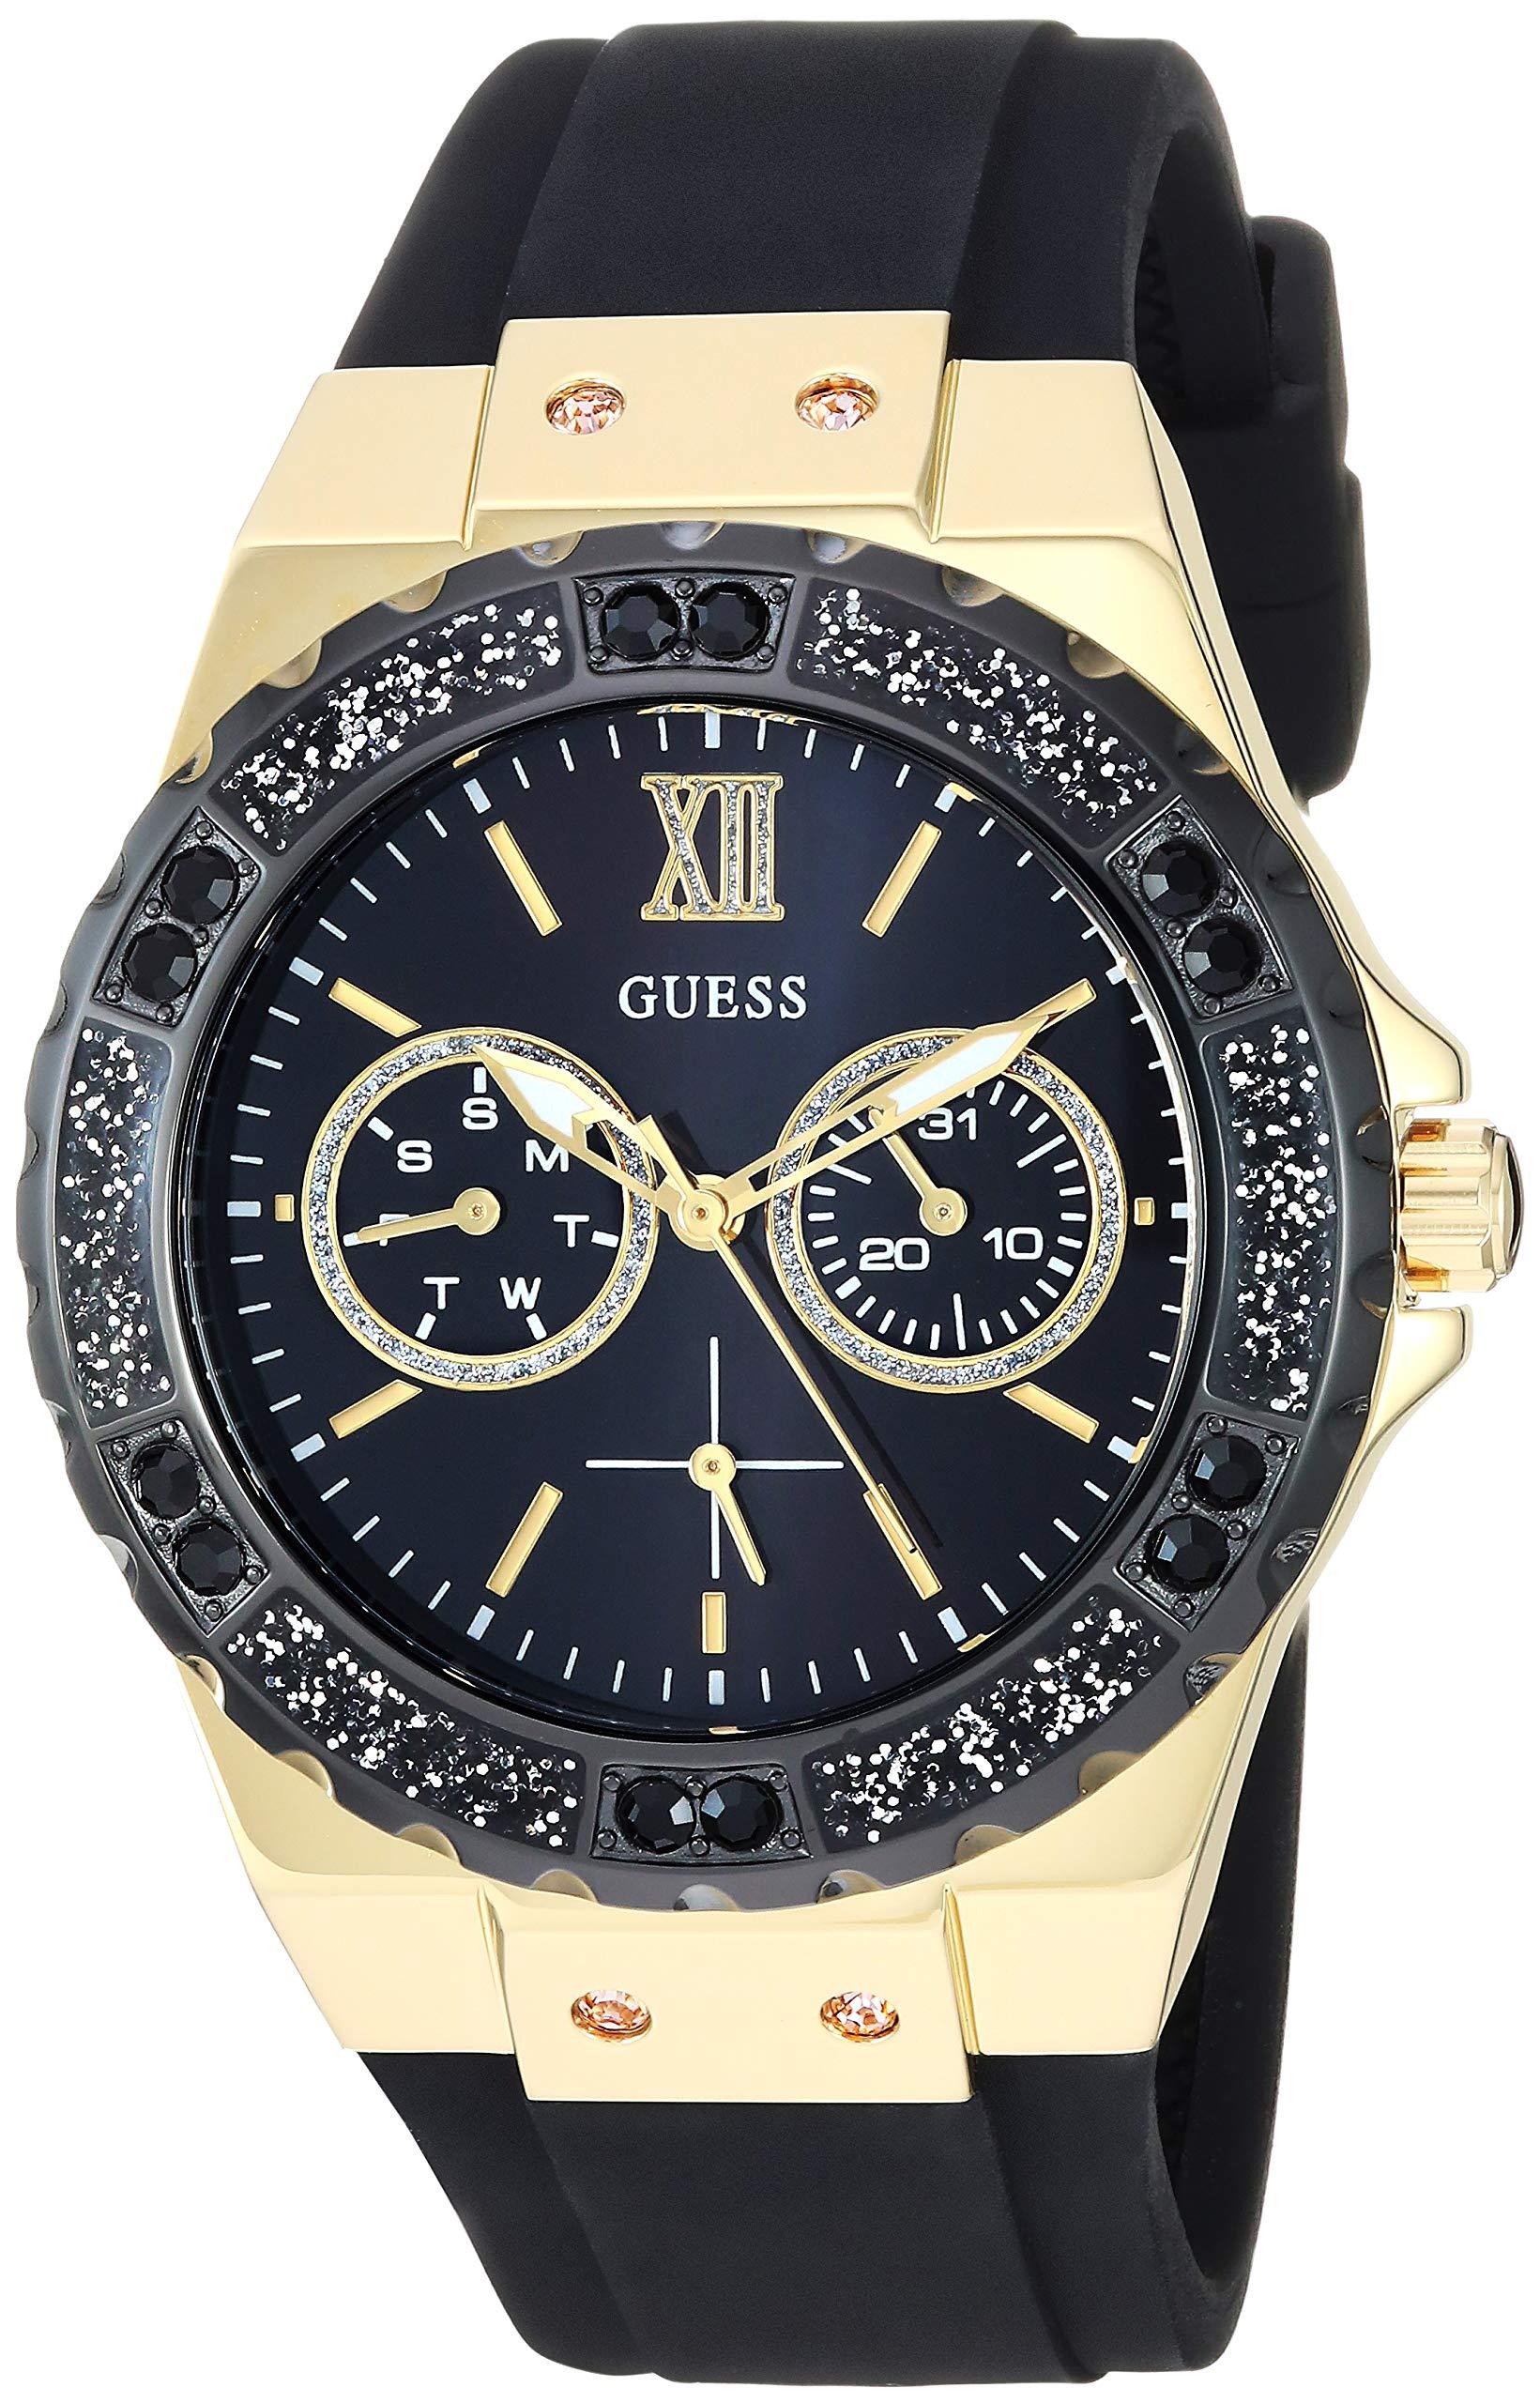 Guess Stainless Steel Japanese Quartz Watch With Leather Strap, Brown, 16  (model: U0884l9) in Black/Silver-Tone (Metallic) - Save 67% - Lyst